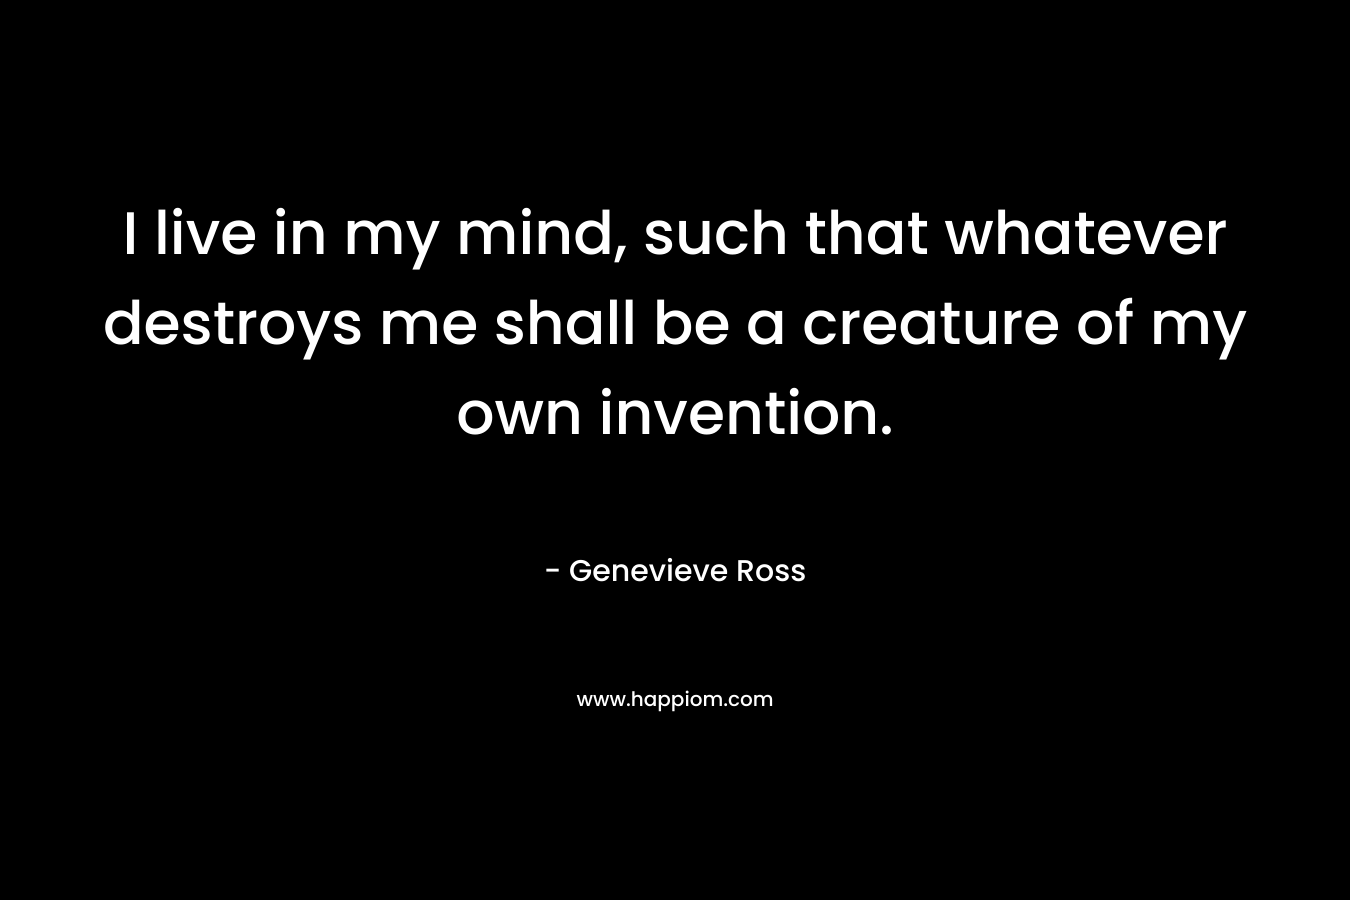 I live in my mind, such that whatever destroys me shall be a creature of my own invention.